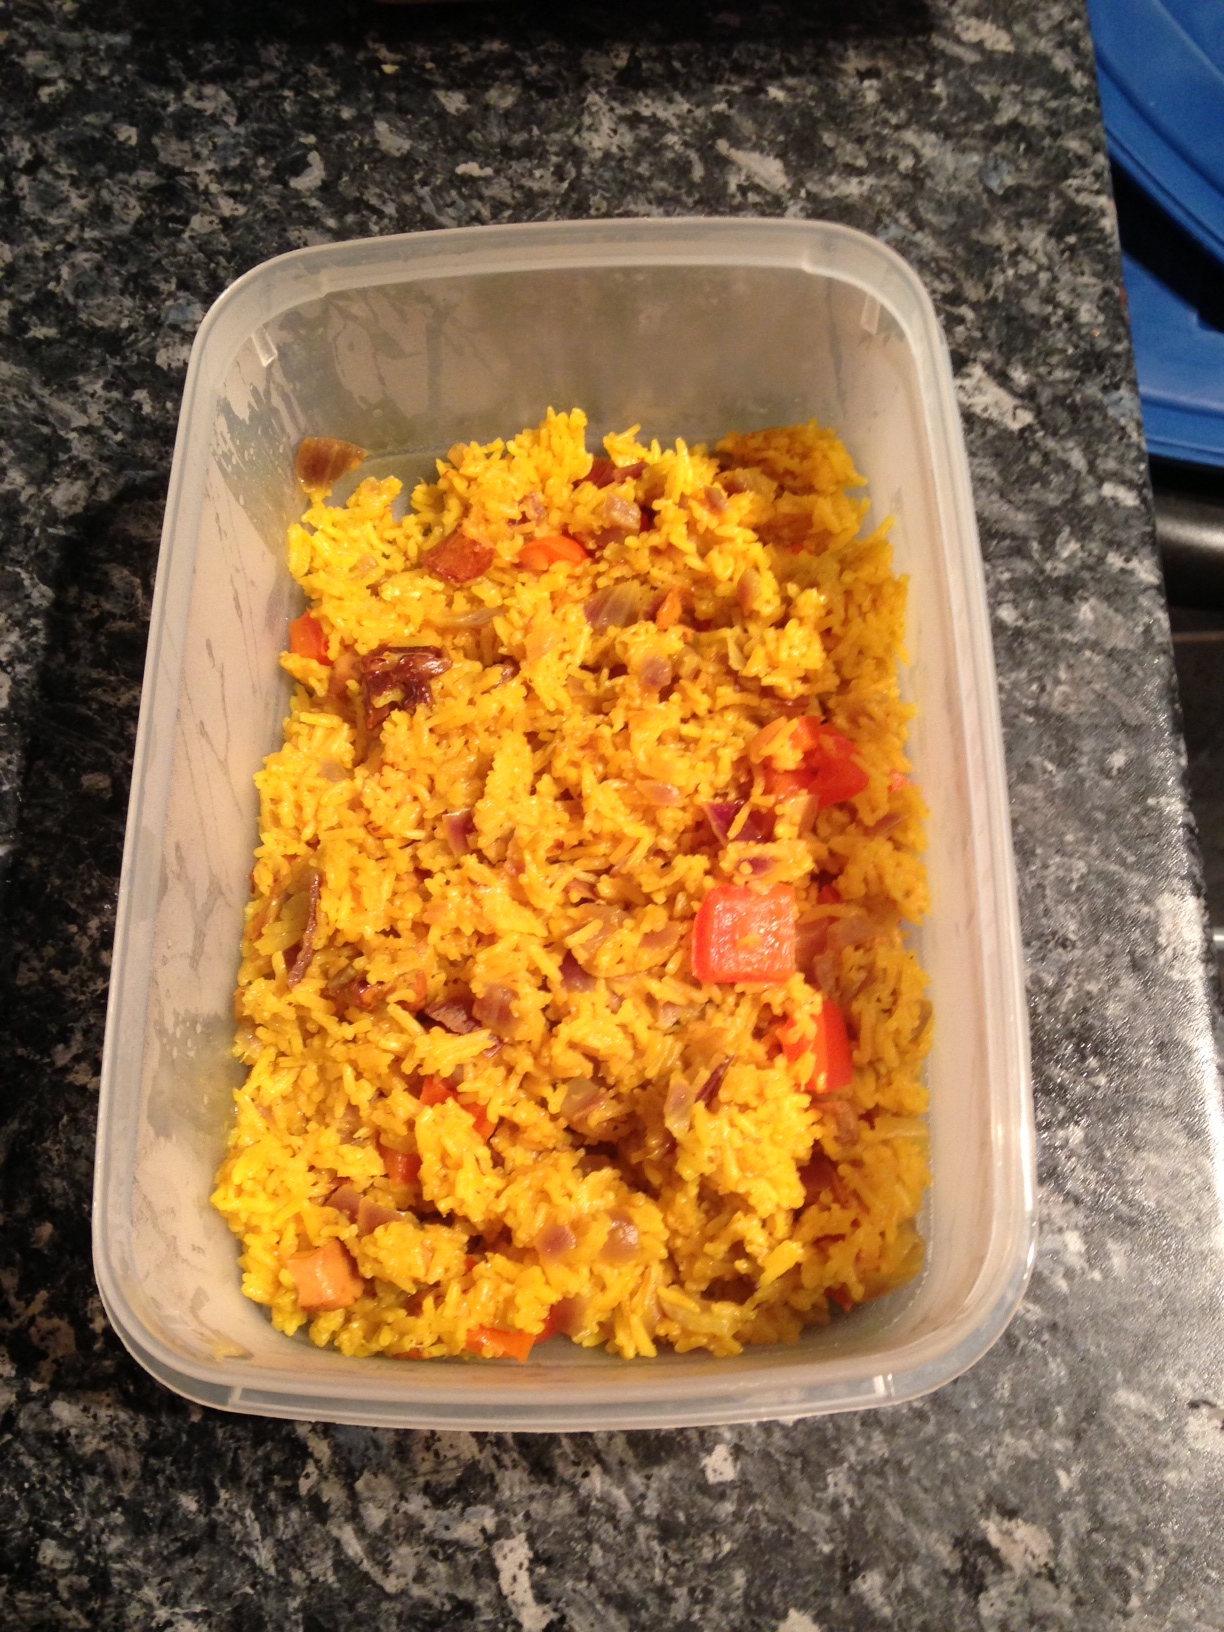 Recipe: Yellow Rice, Red Pepper, rated 3.9/5 - 16 votes